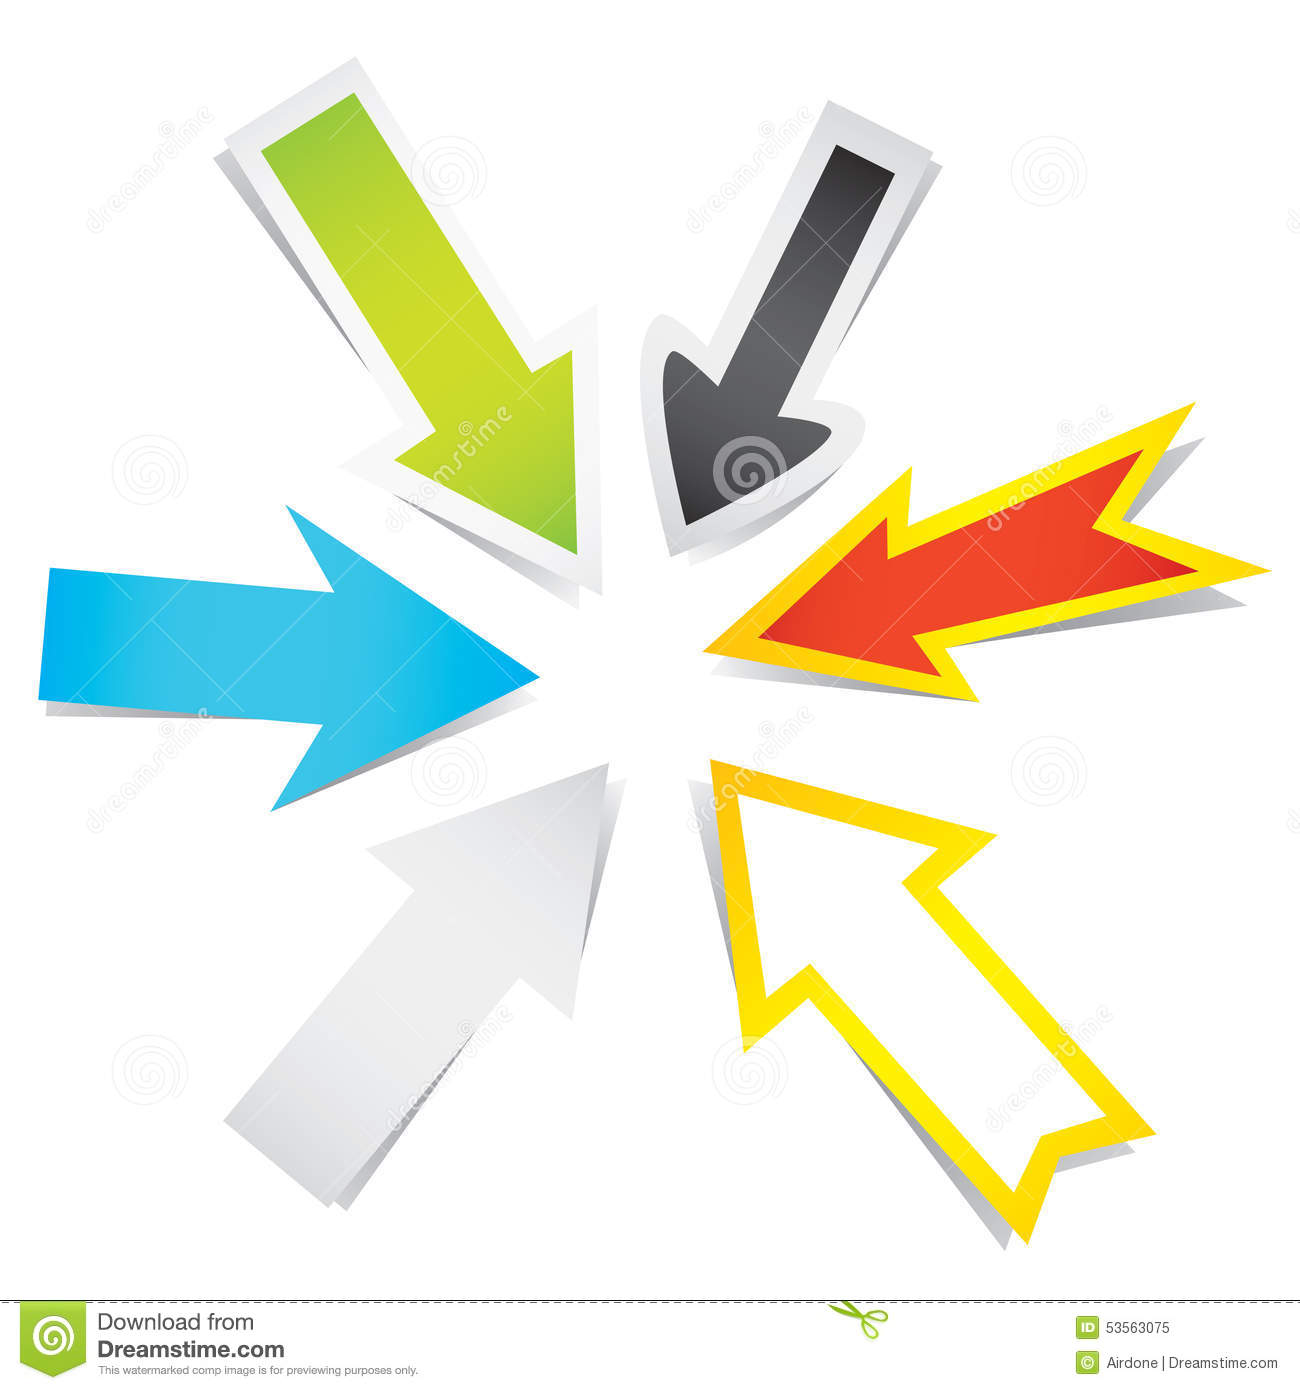 Vector Illustration Of Many Arrows Pointing To The Center Isolated On